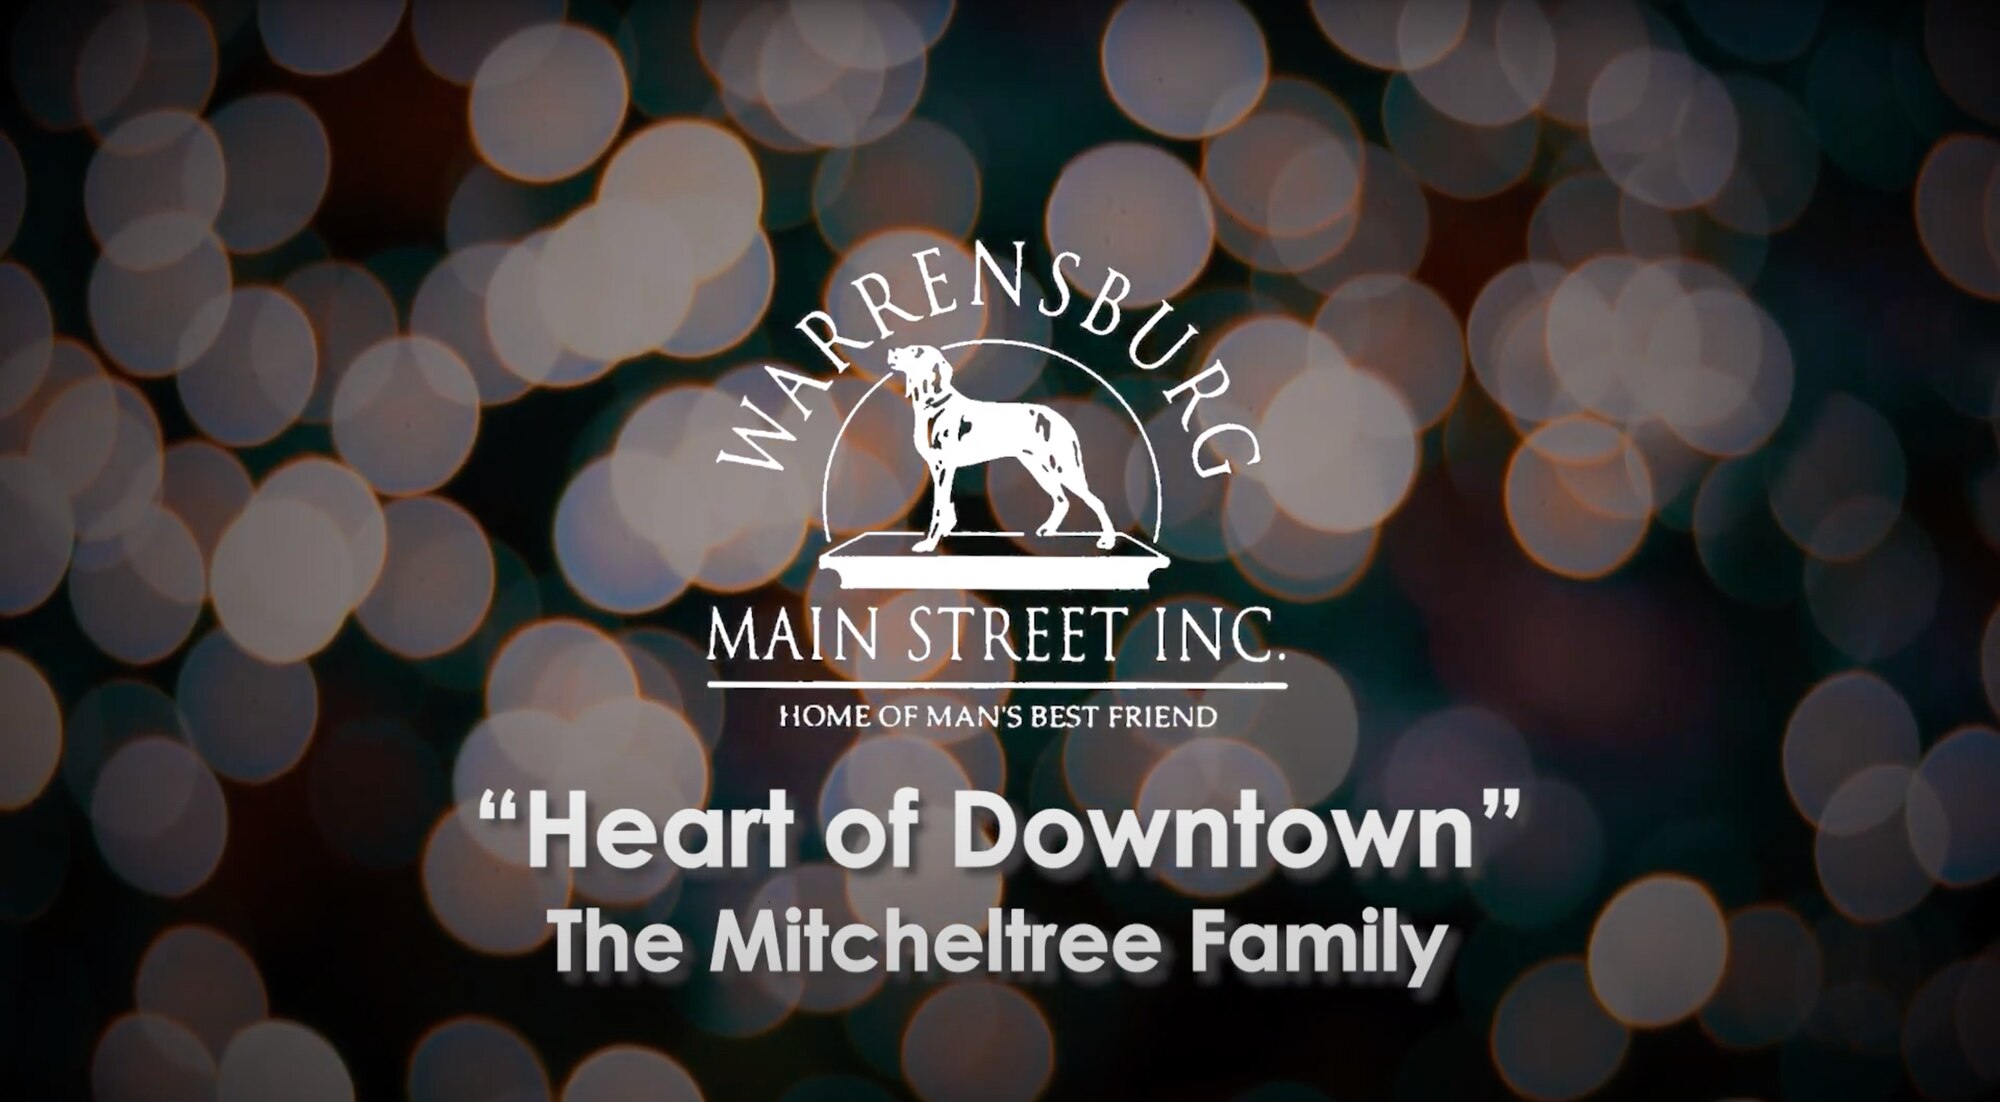 The Mitchelltrees, an Air Force family assigned to Whiteman Air Force Base, Mo., earned the Warrensburg Main Street “Heart of Downtown” award for their volunteer contributions to the Warrensburg Community. The award was revealed during the virtual “Evening of Excellence” Jan. 14, 2021. (Courtesy Graphic by Warrensburg Main Street Inc.)